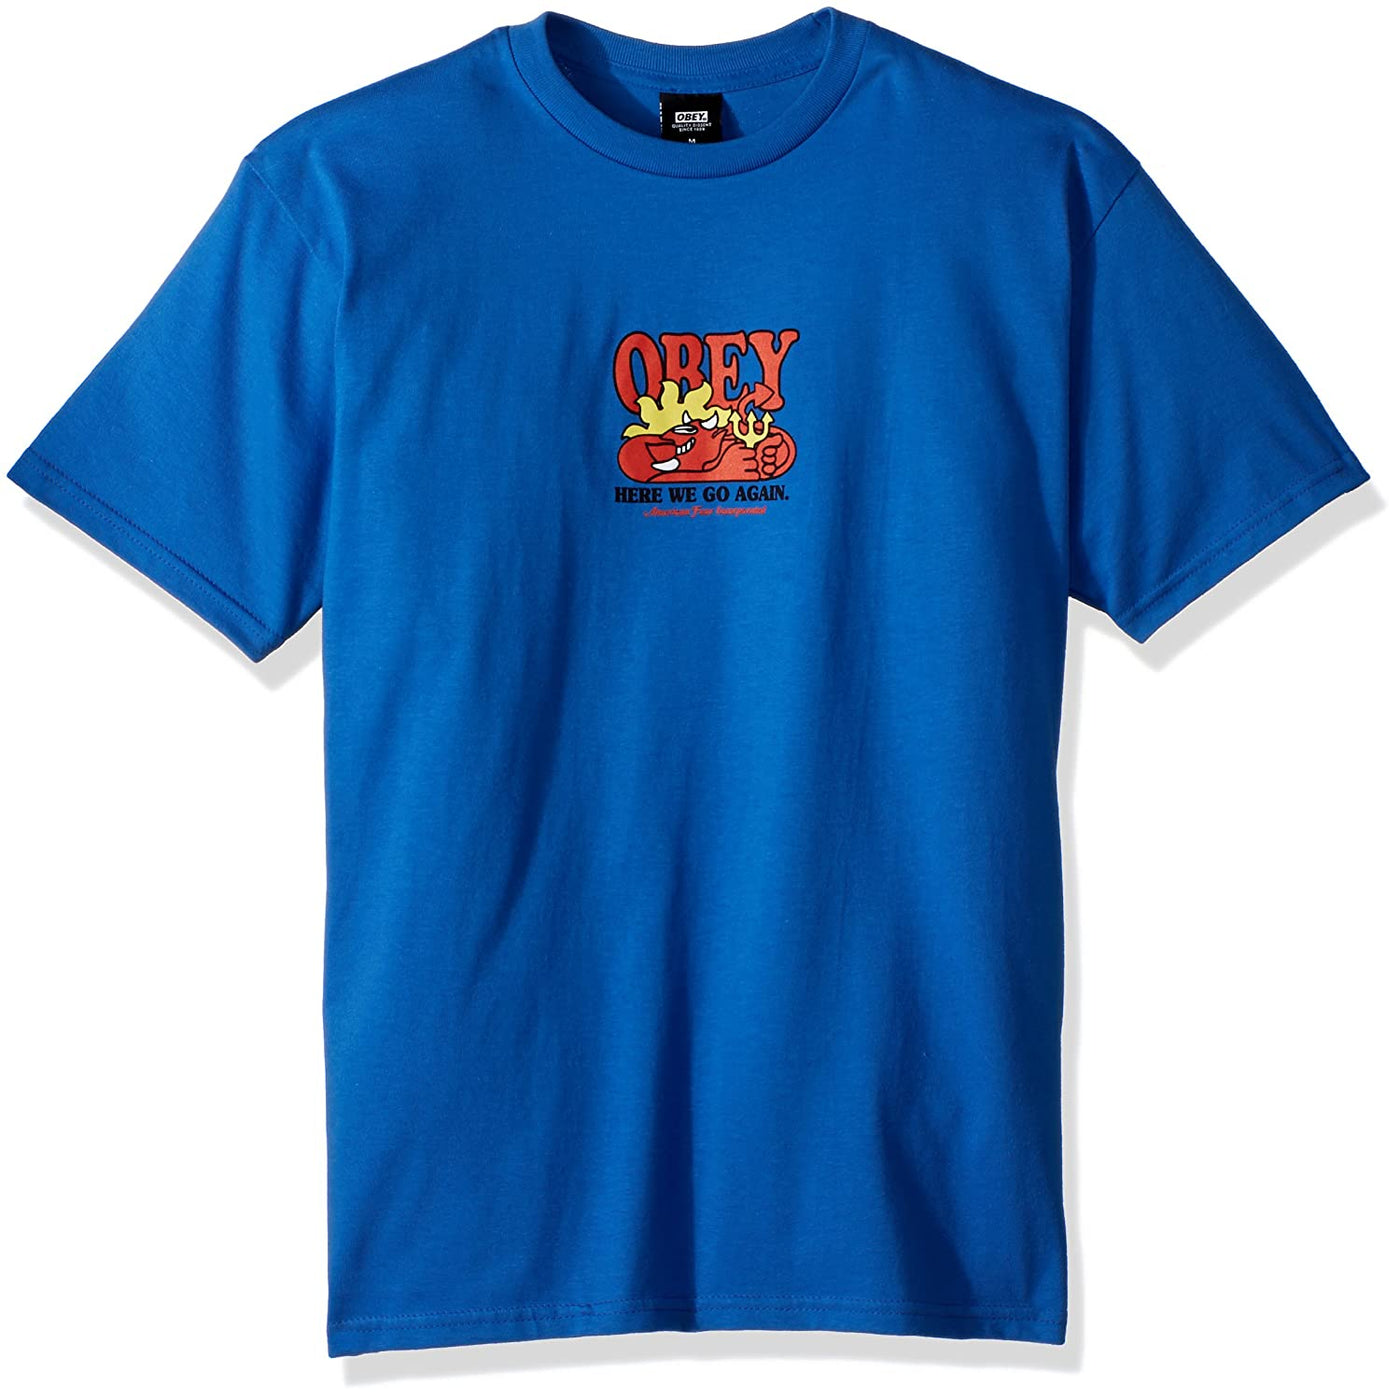 OBEY HERE WE GO AGAIN CLASSIC T-SHIRT ROYAL BLUE